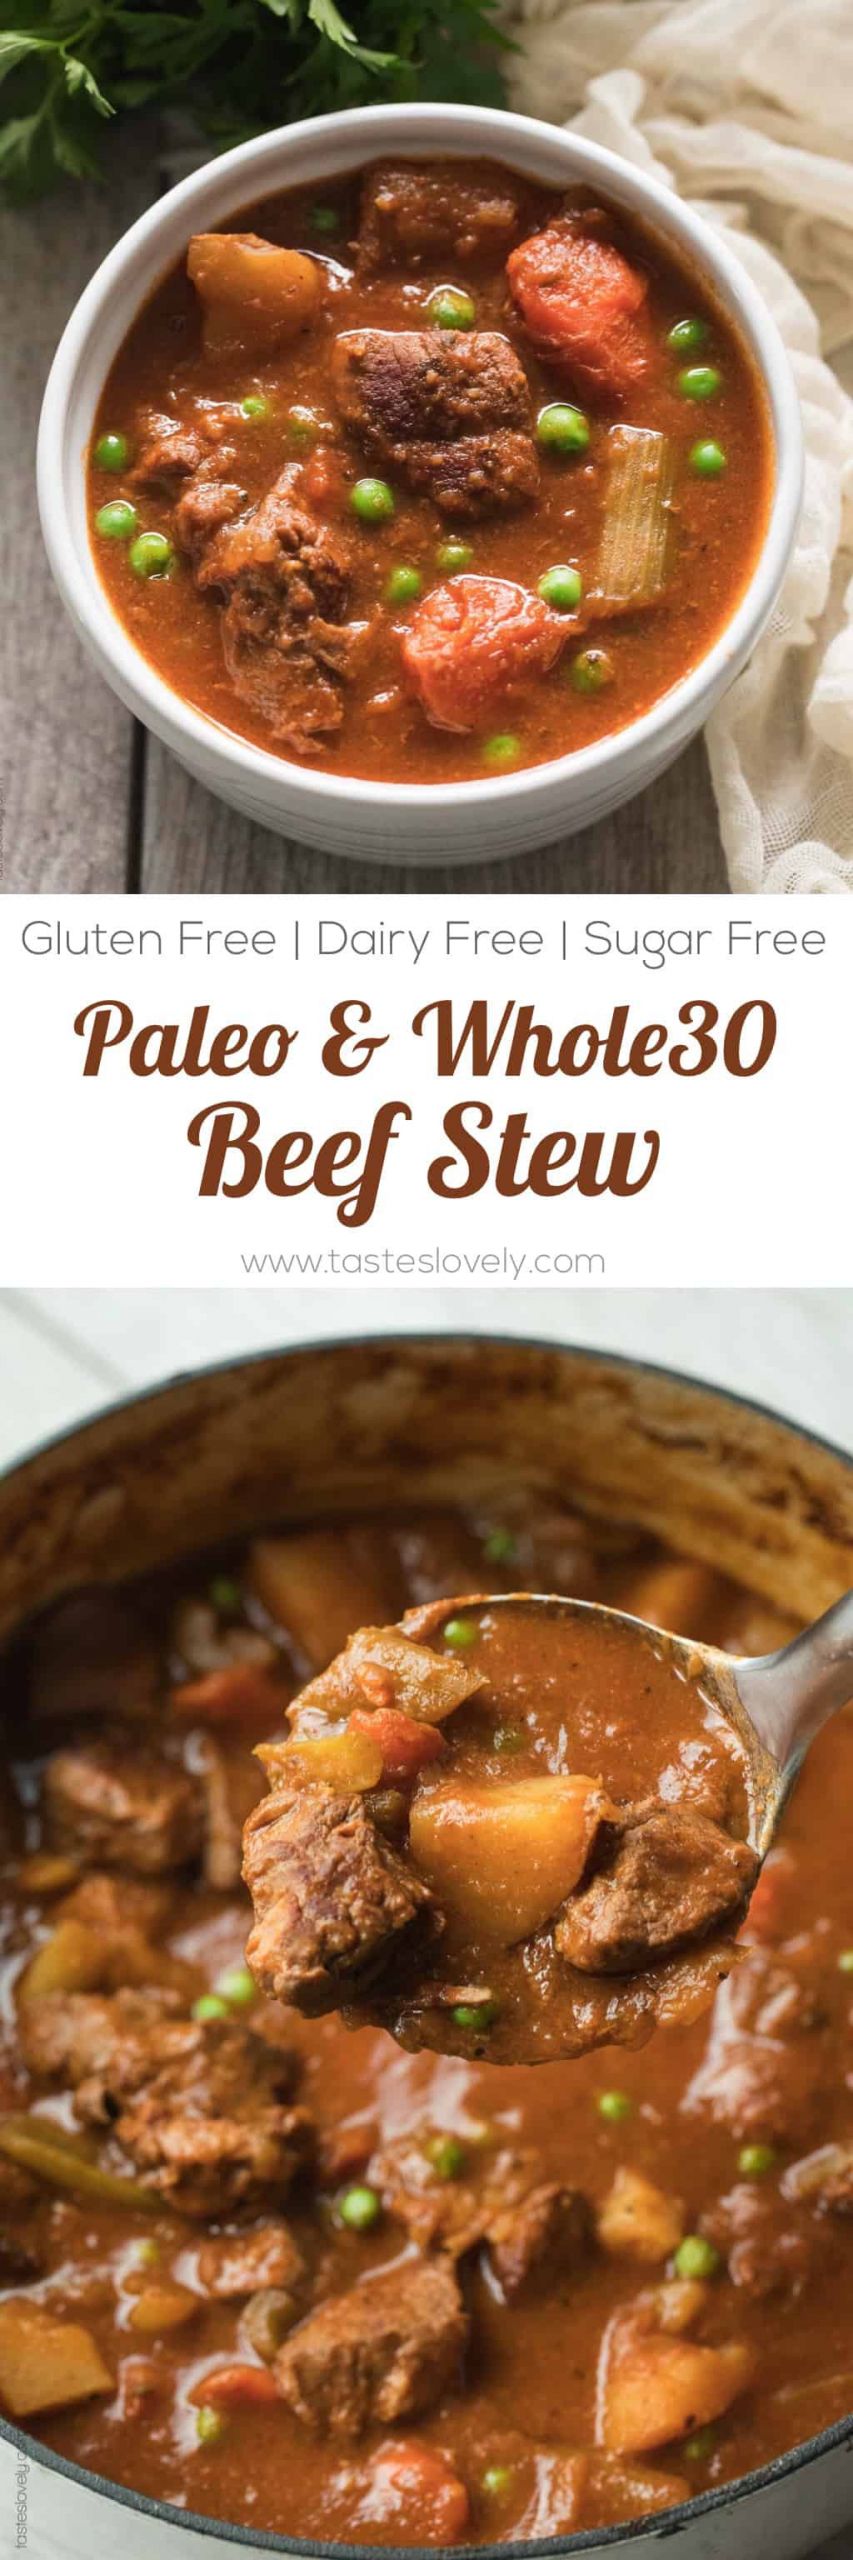 Whole30 Beef Recipes
 Paleo & Whole30 Beef Stew Slow Cooker or Dutch Oven